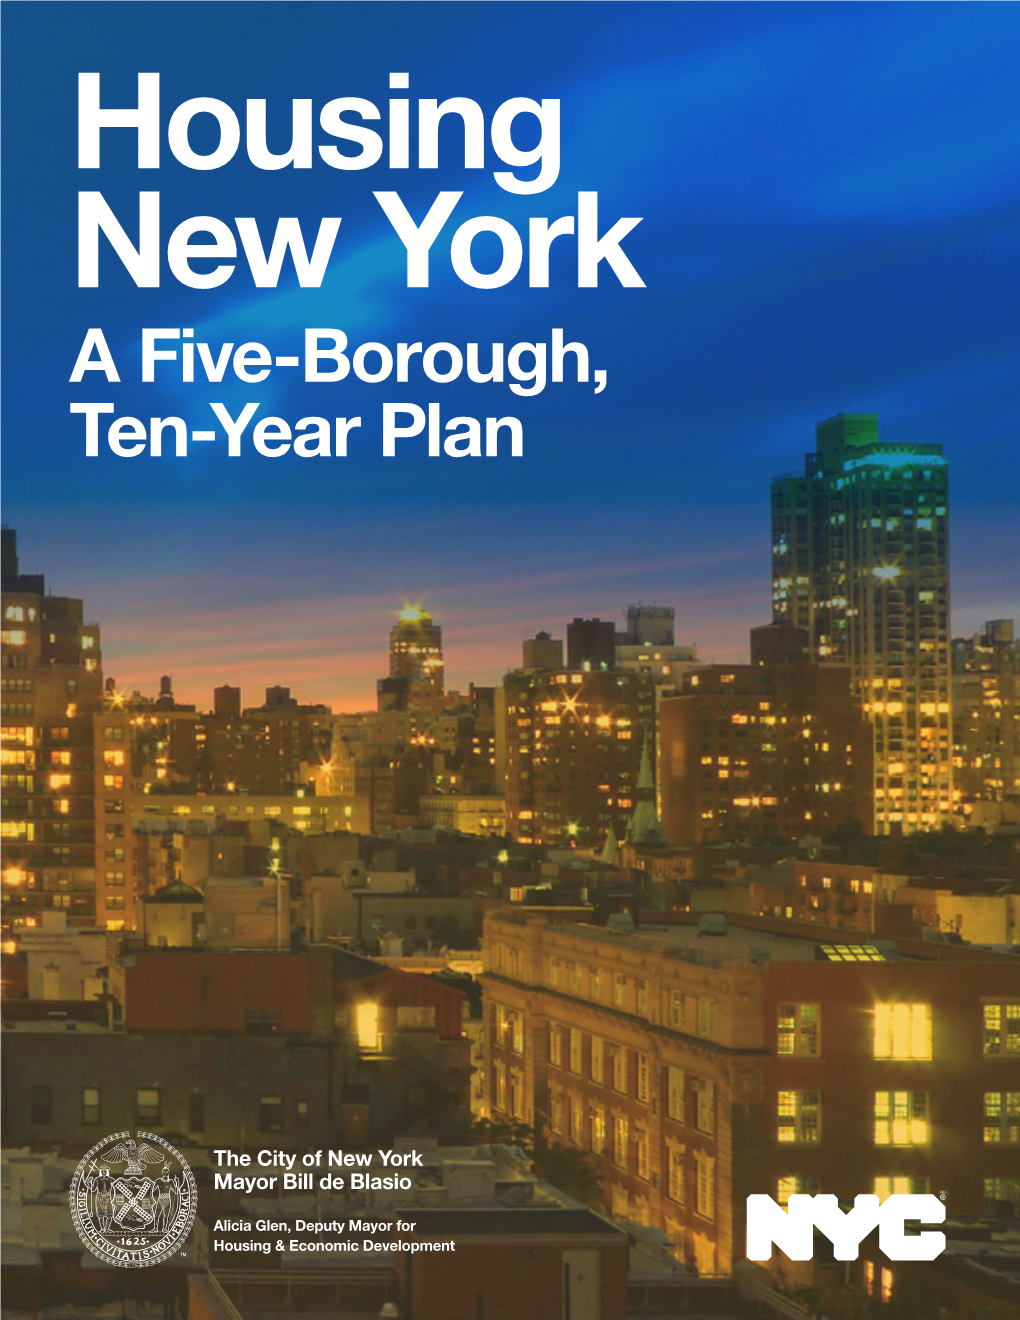 Housing New York: a Five-Borough, Ten-Year Plan 2 to My Fellow New Yorkers